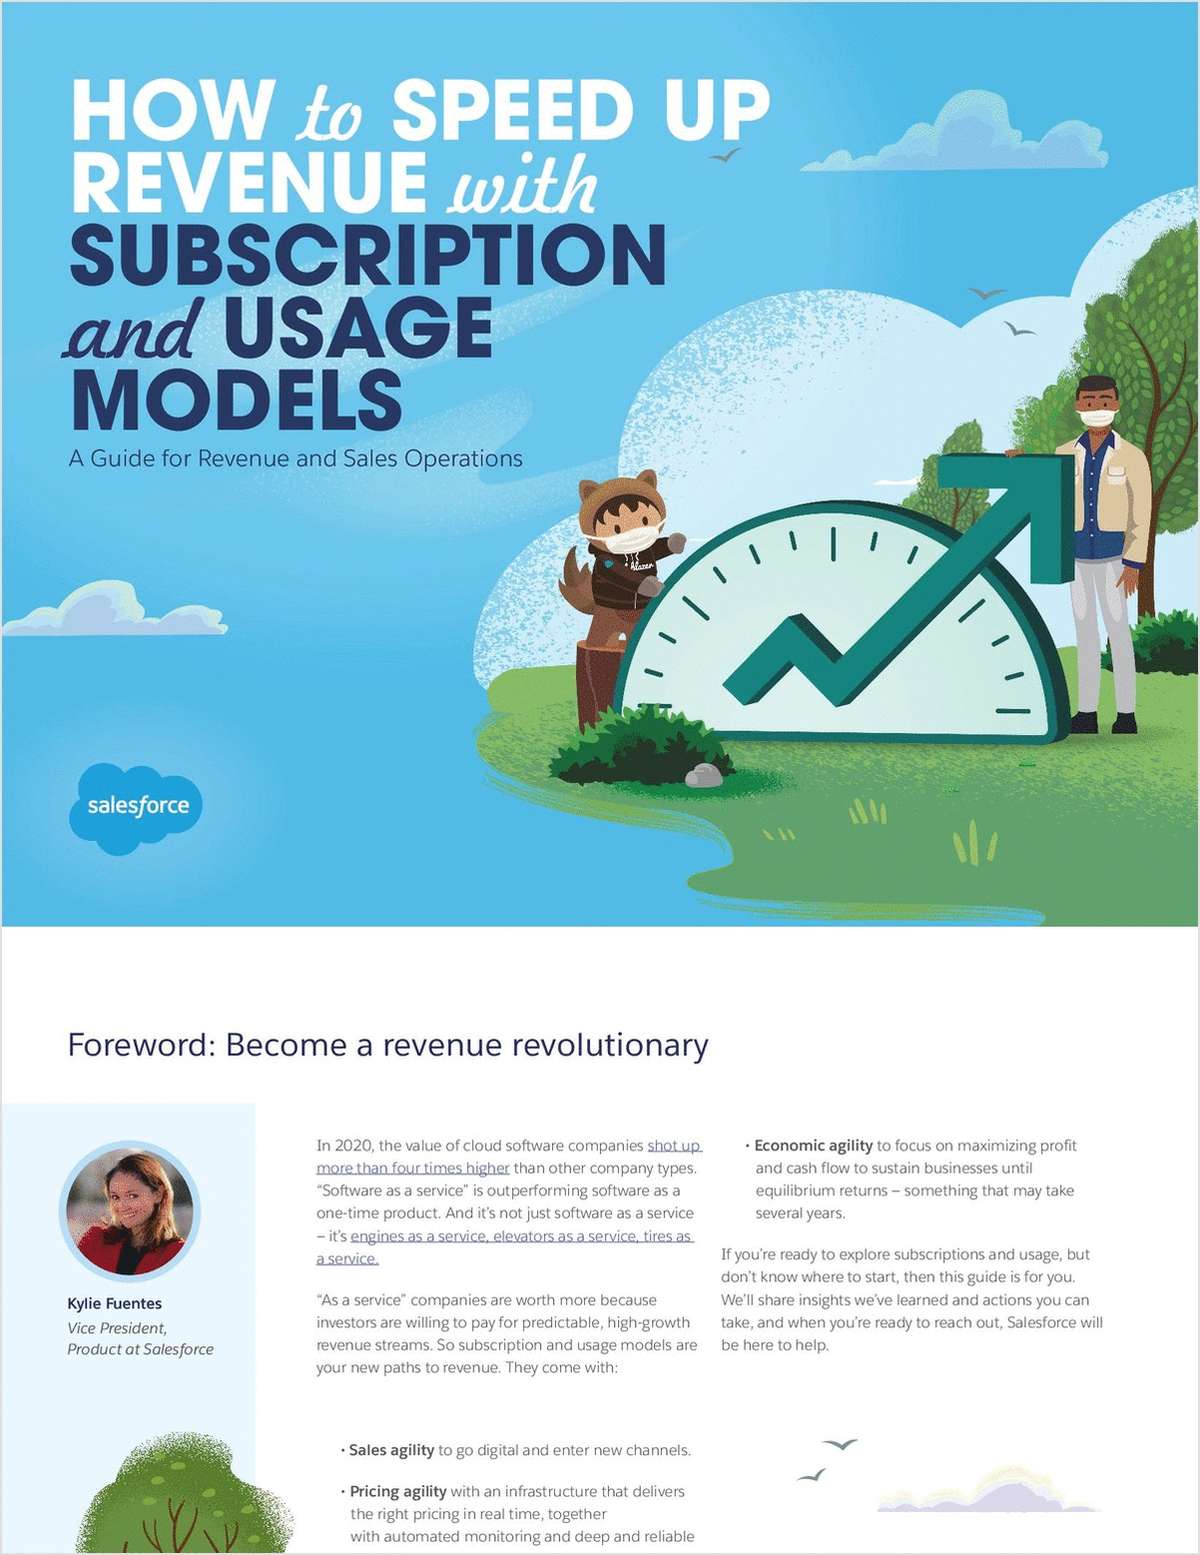 How to Speed Up Revenue With Subscription and Usage Models